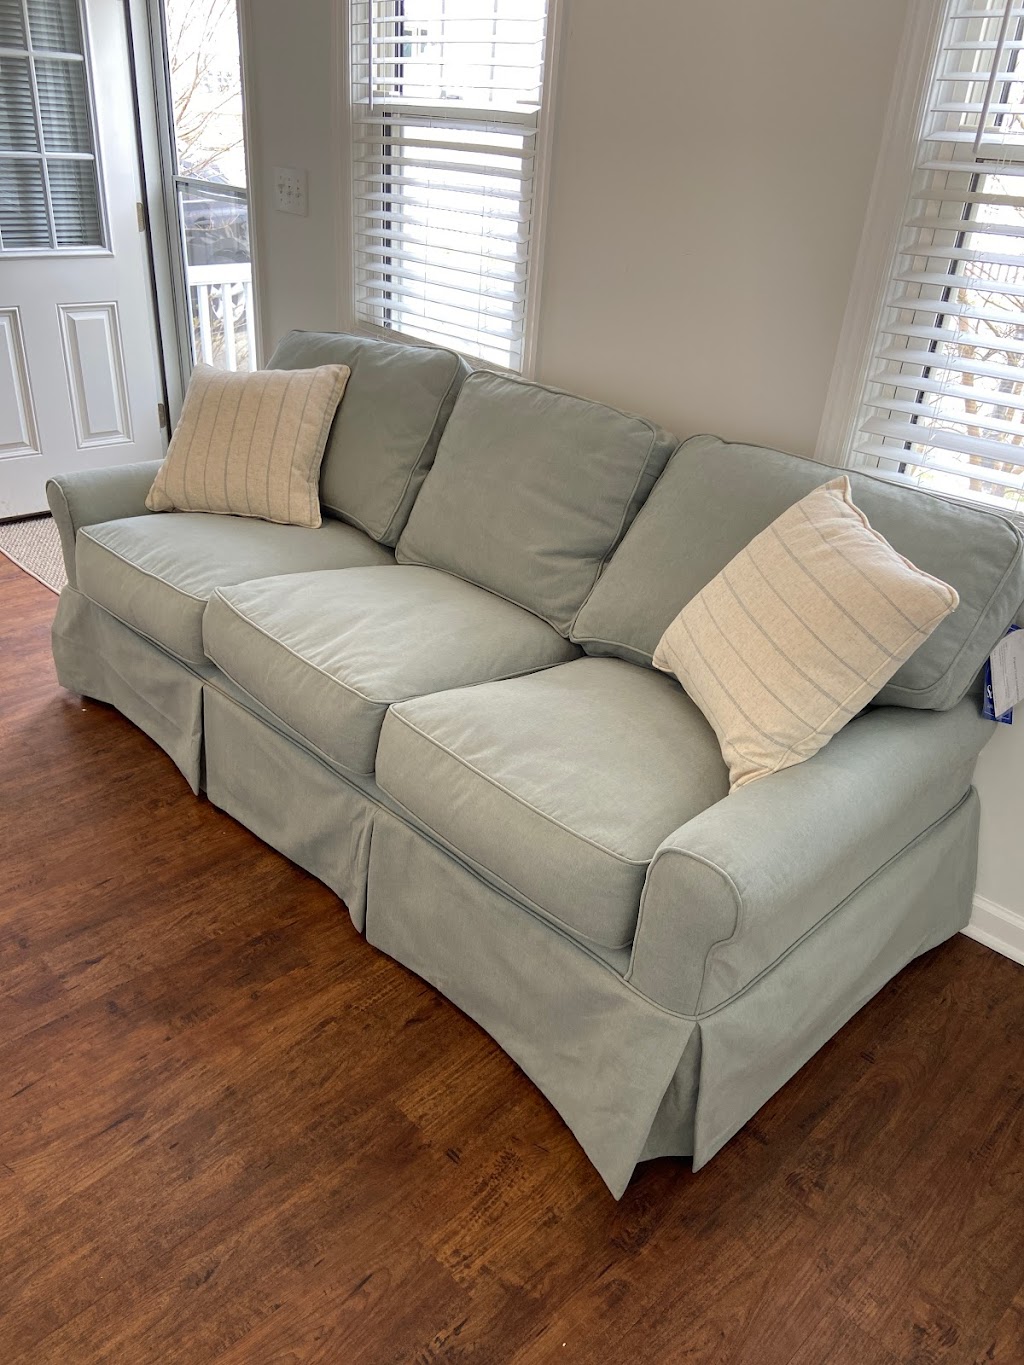 Surfside Casual Furniture | 11 MacArthur Blvd, Somers Point, NJ 08244 | Phone: (609) 927-4000